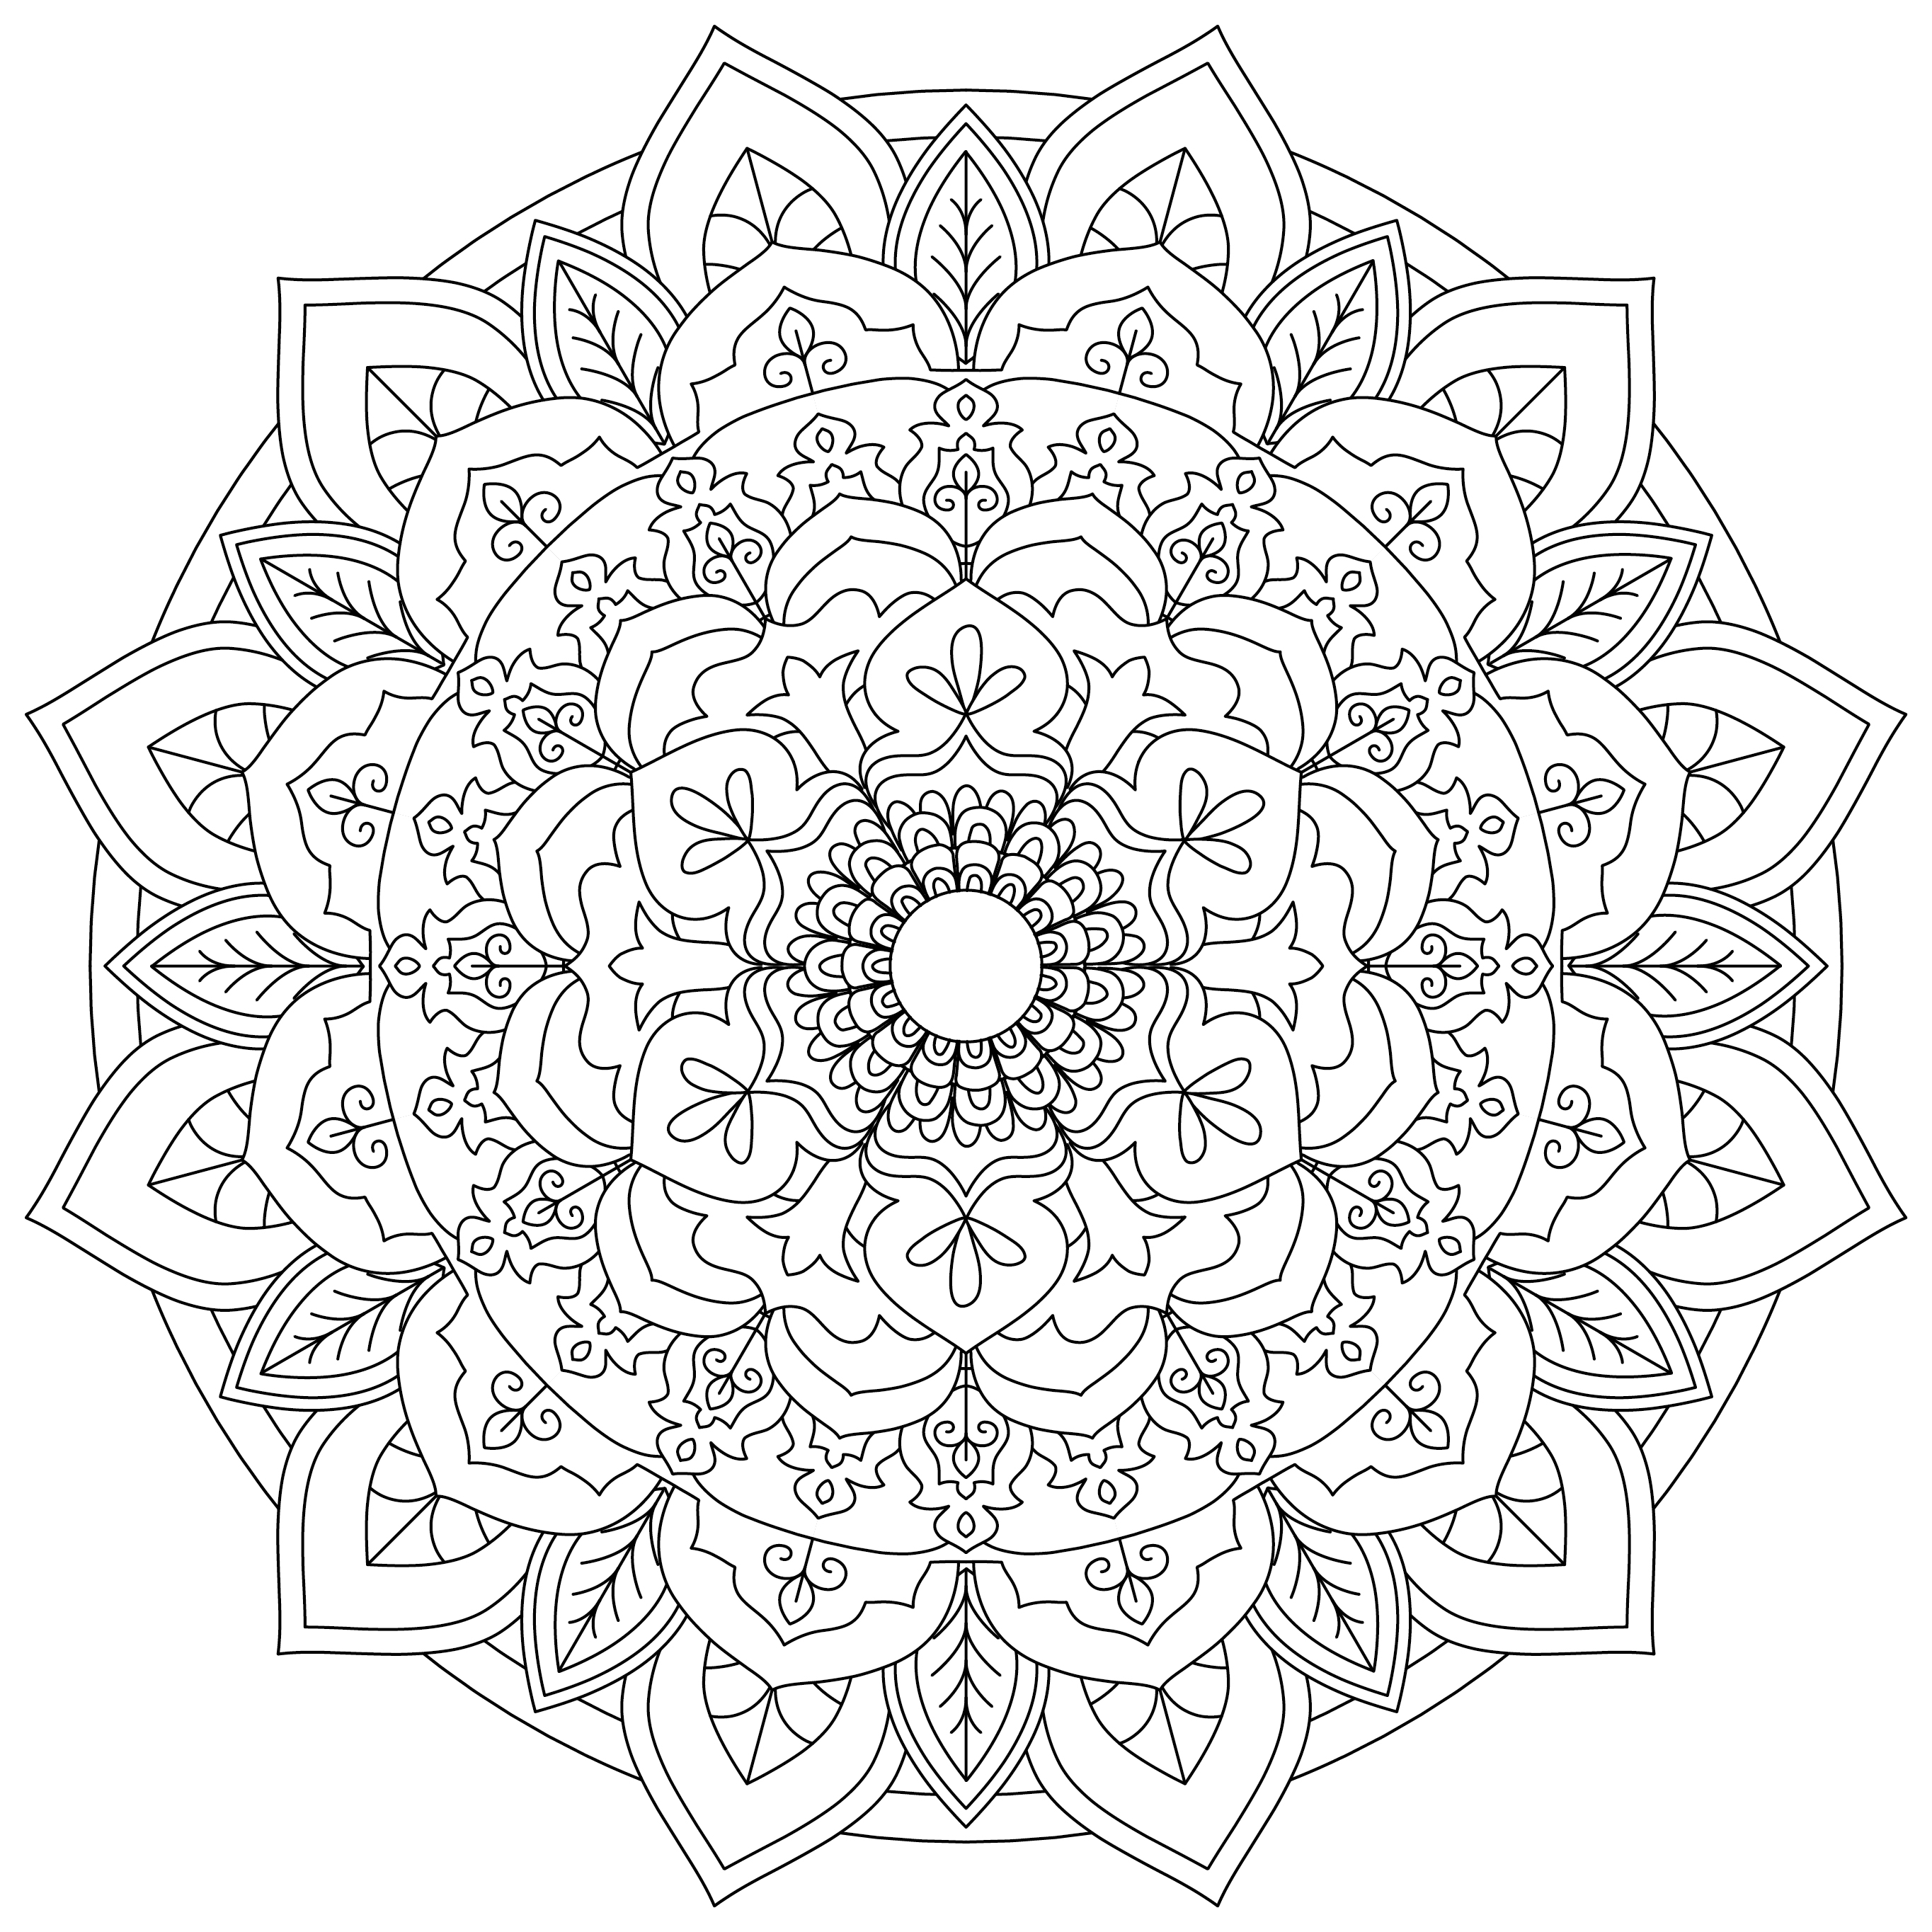 mandala-monday-3-free-download-to-colour-in-gentleman-crafter